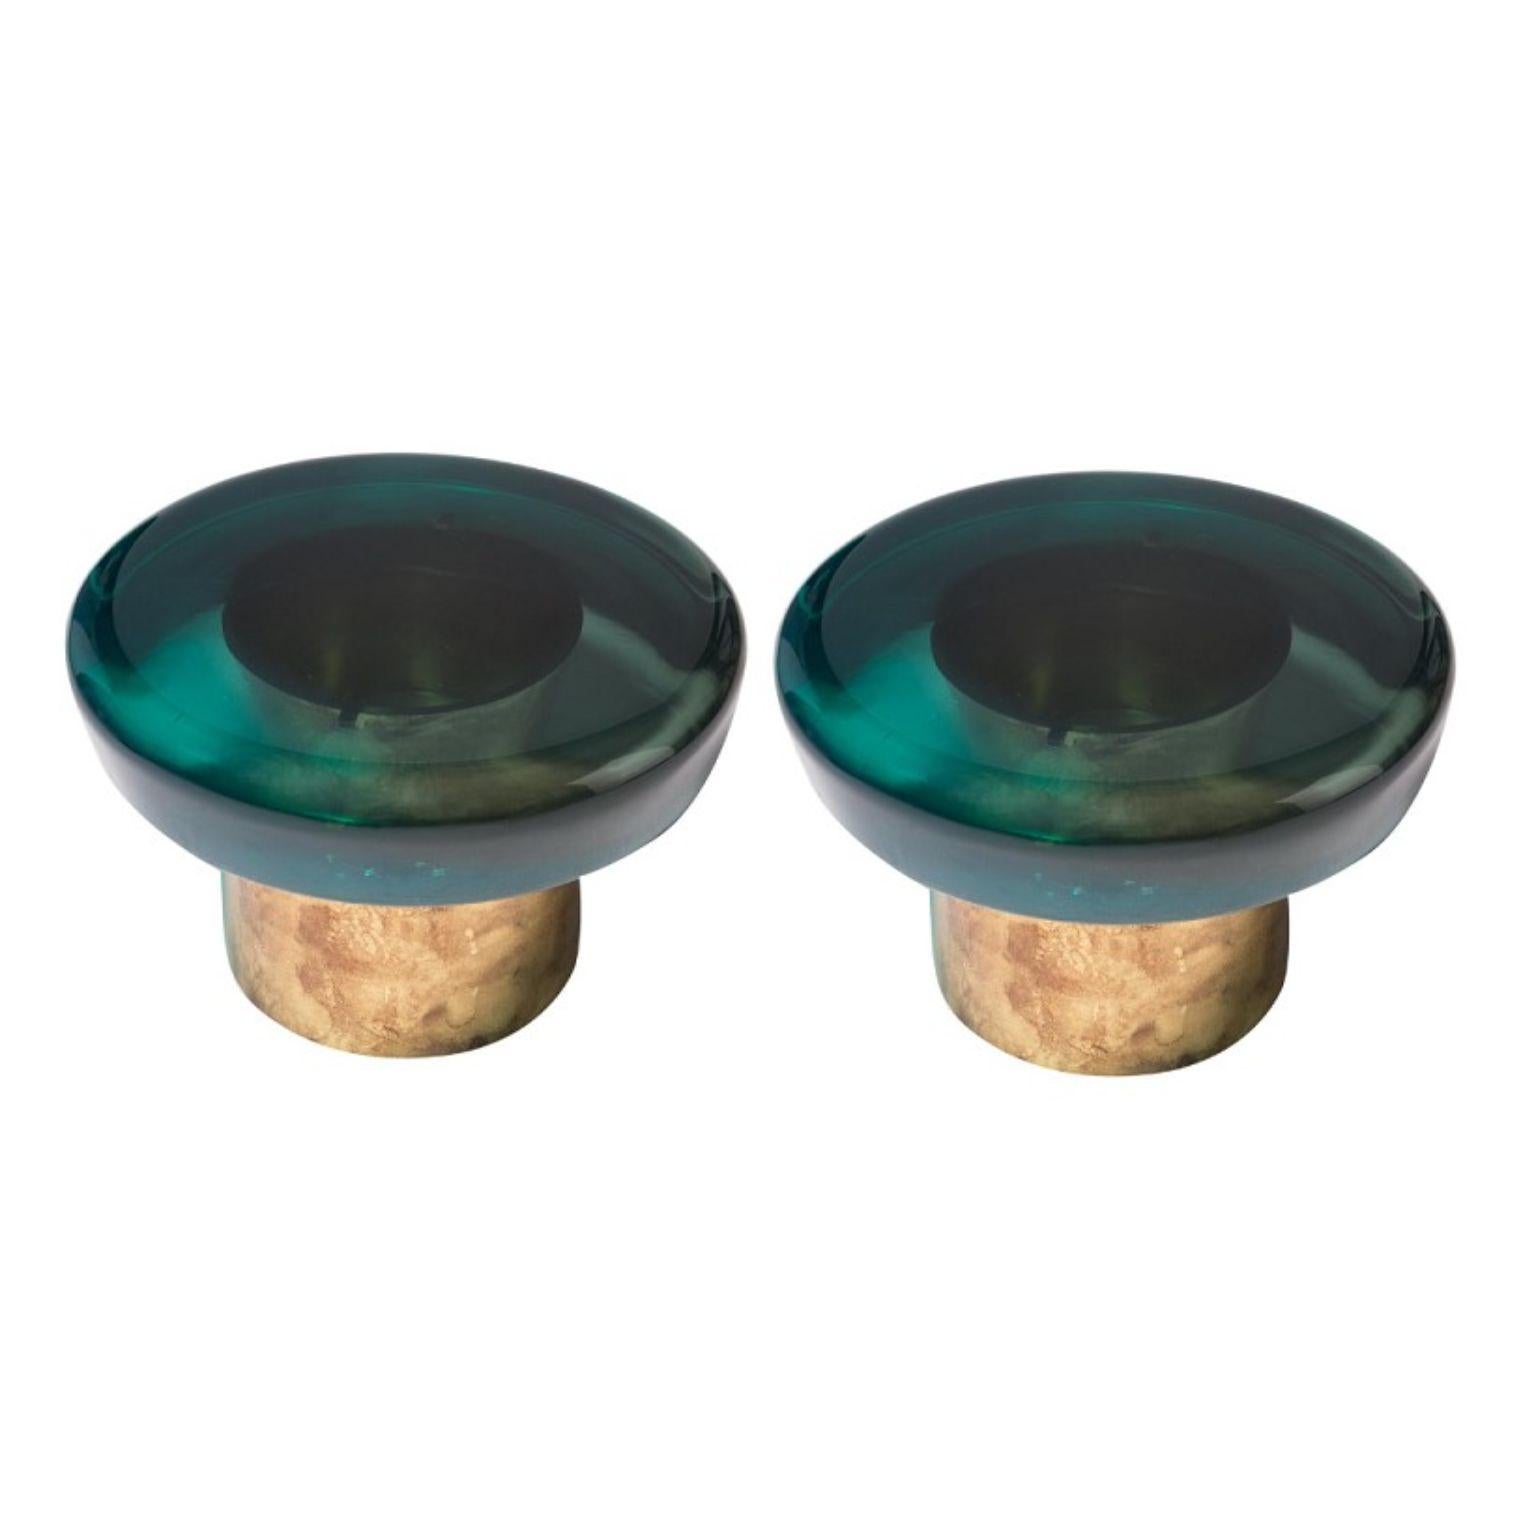 Set of 2 Jade coffee tables by Draga & Aurel
Dimensions: W 50, D 50, H 28, top Ø 50 cm
Materials: Resin and bronze

Also available: W 50, D 50, H 38, top Ø 50 cm

Formed from a combination of reflective resin and solid brass, the Jade coffee